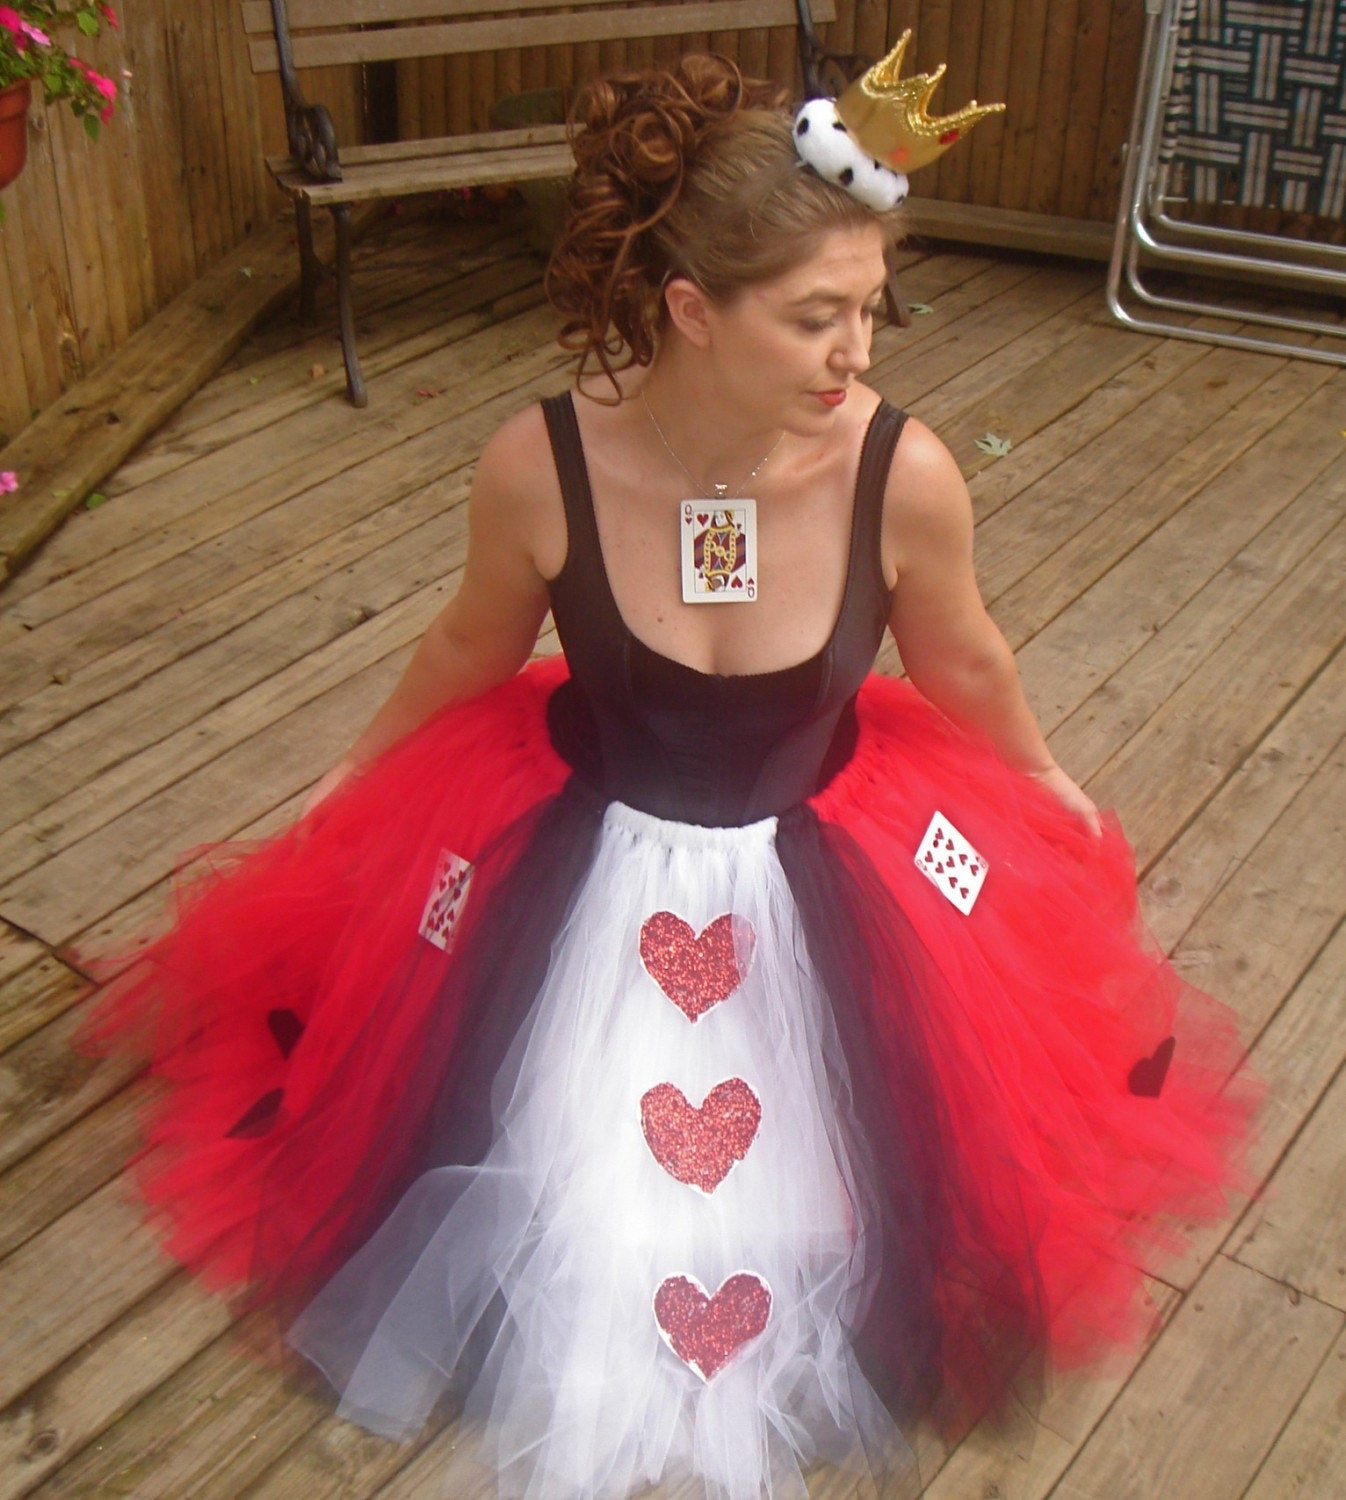 DIY Costume Adult
 Queen of Hearts Adult Boutique Tutu Skirt Costume